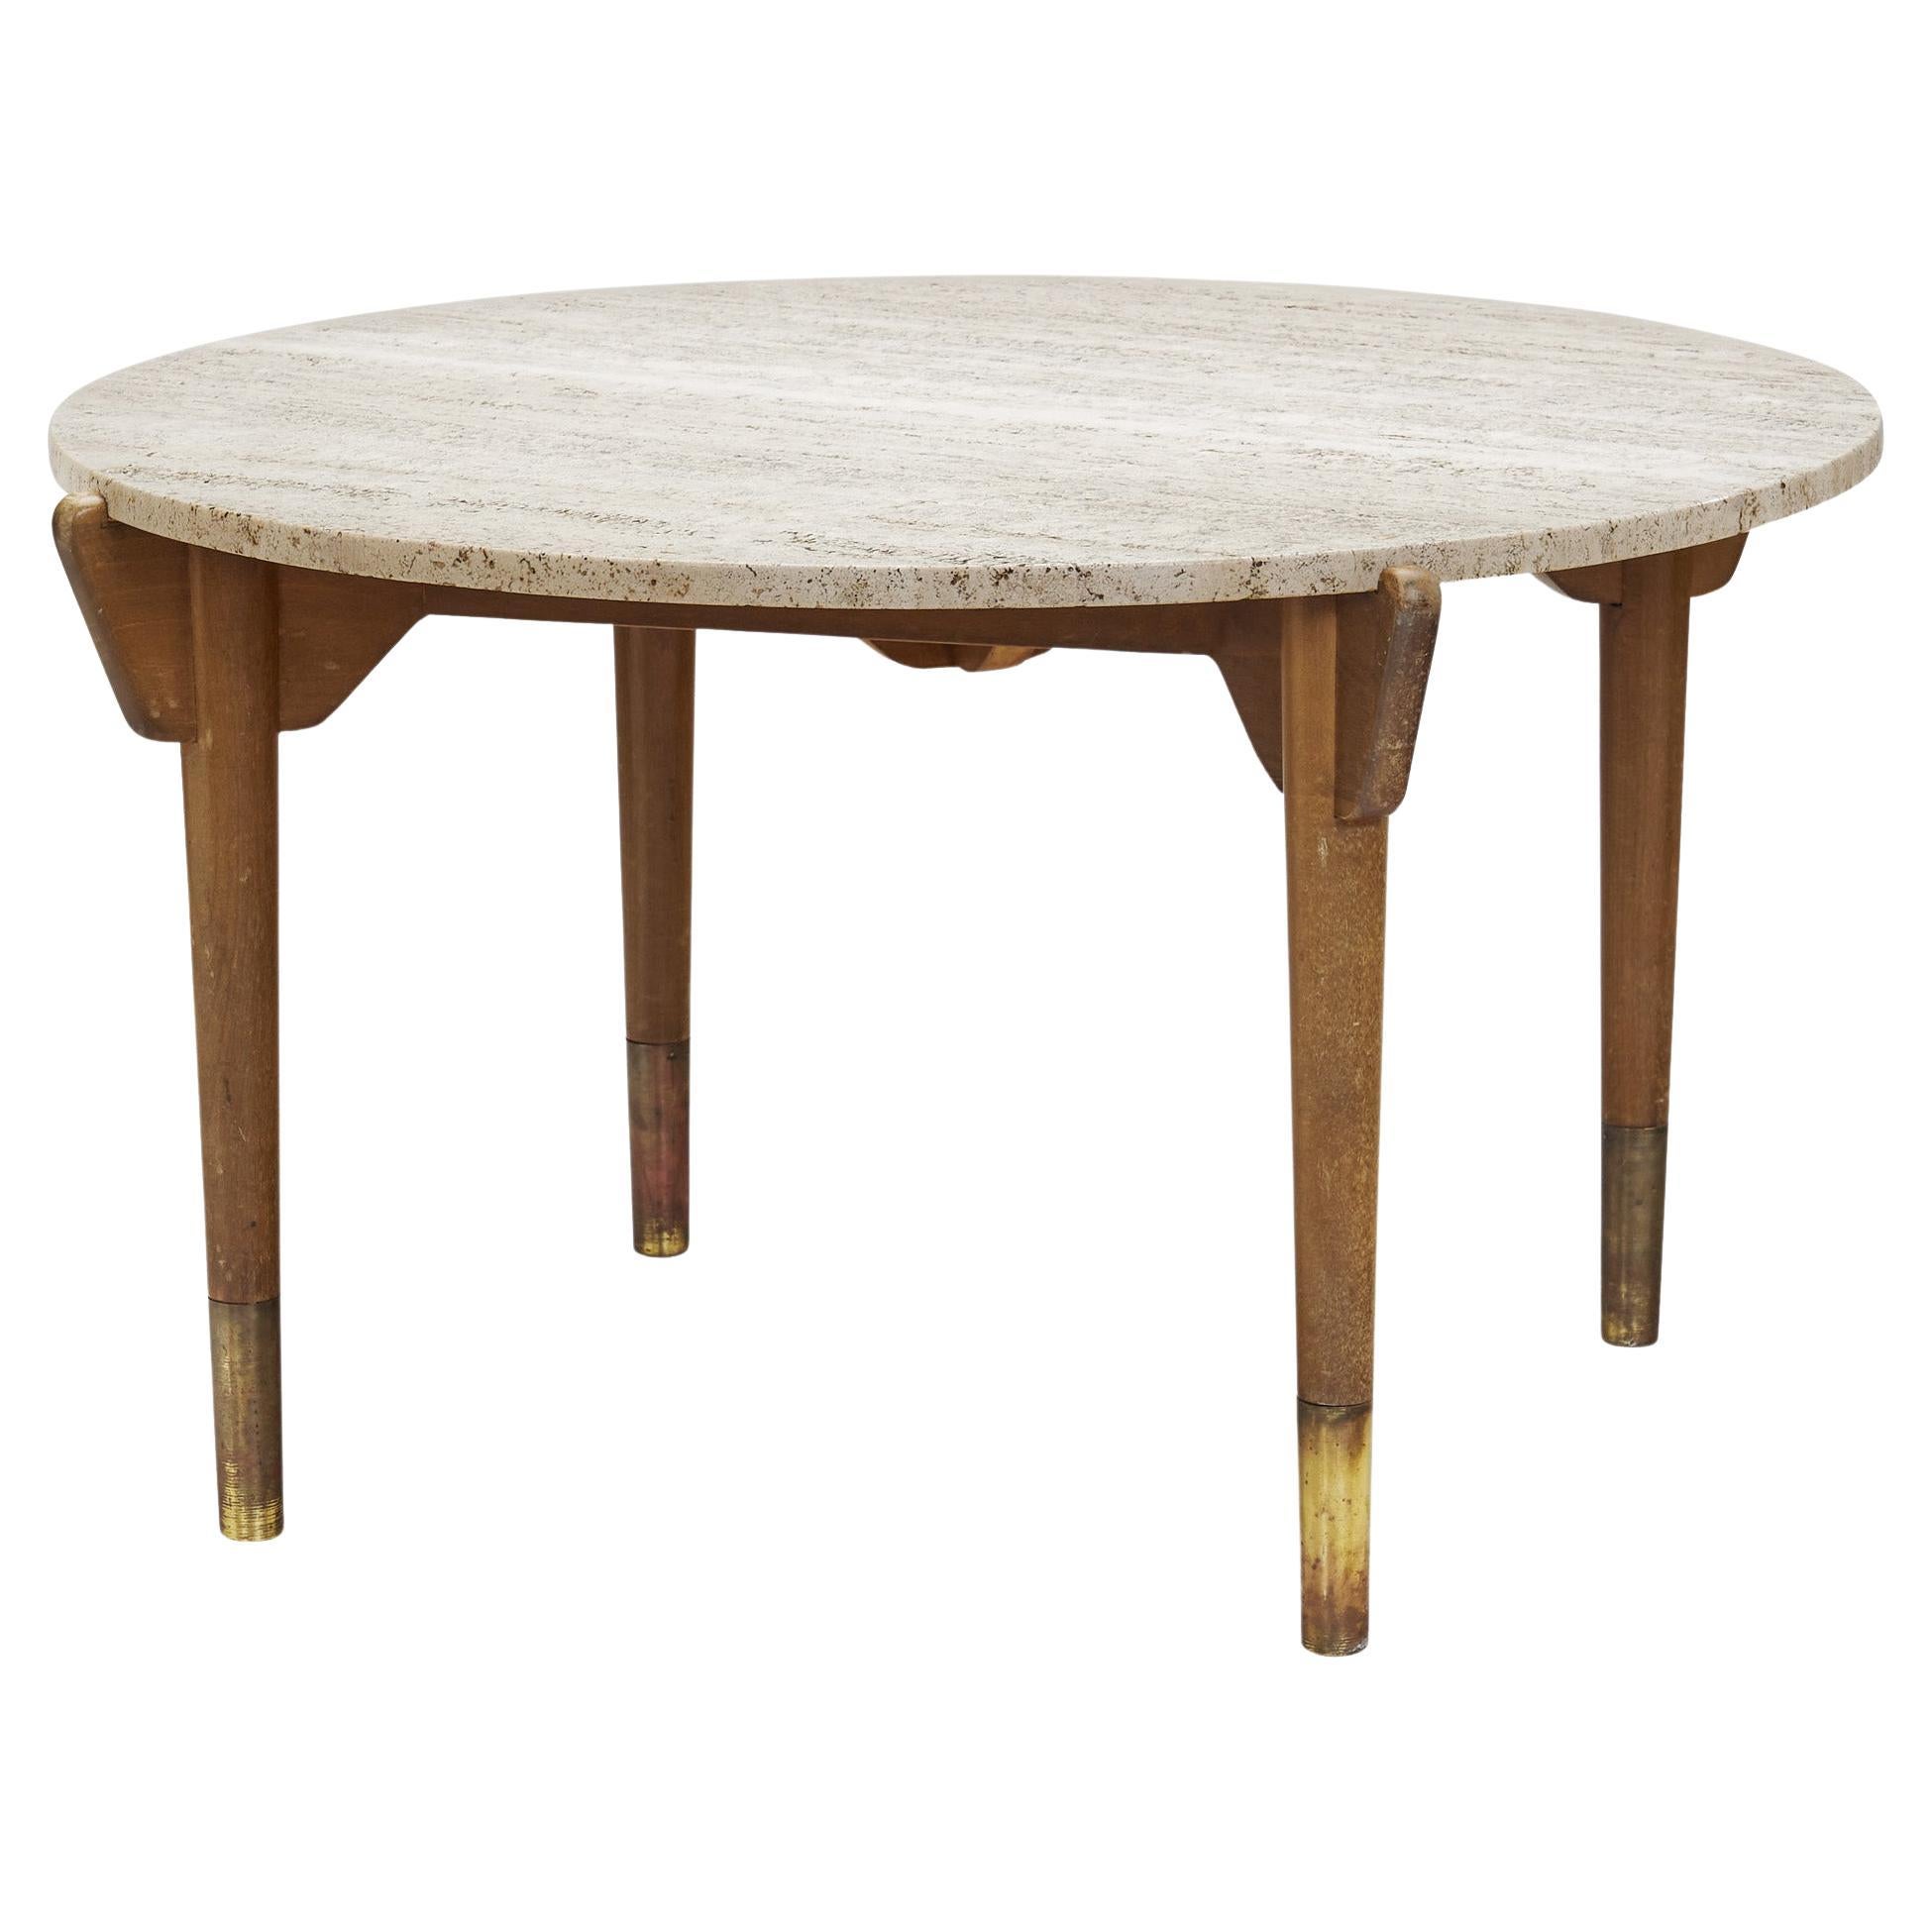 Swedish Modern Stained Beech Coffee Table with Travertine Top, Sweden 1940s